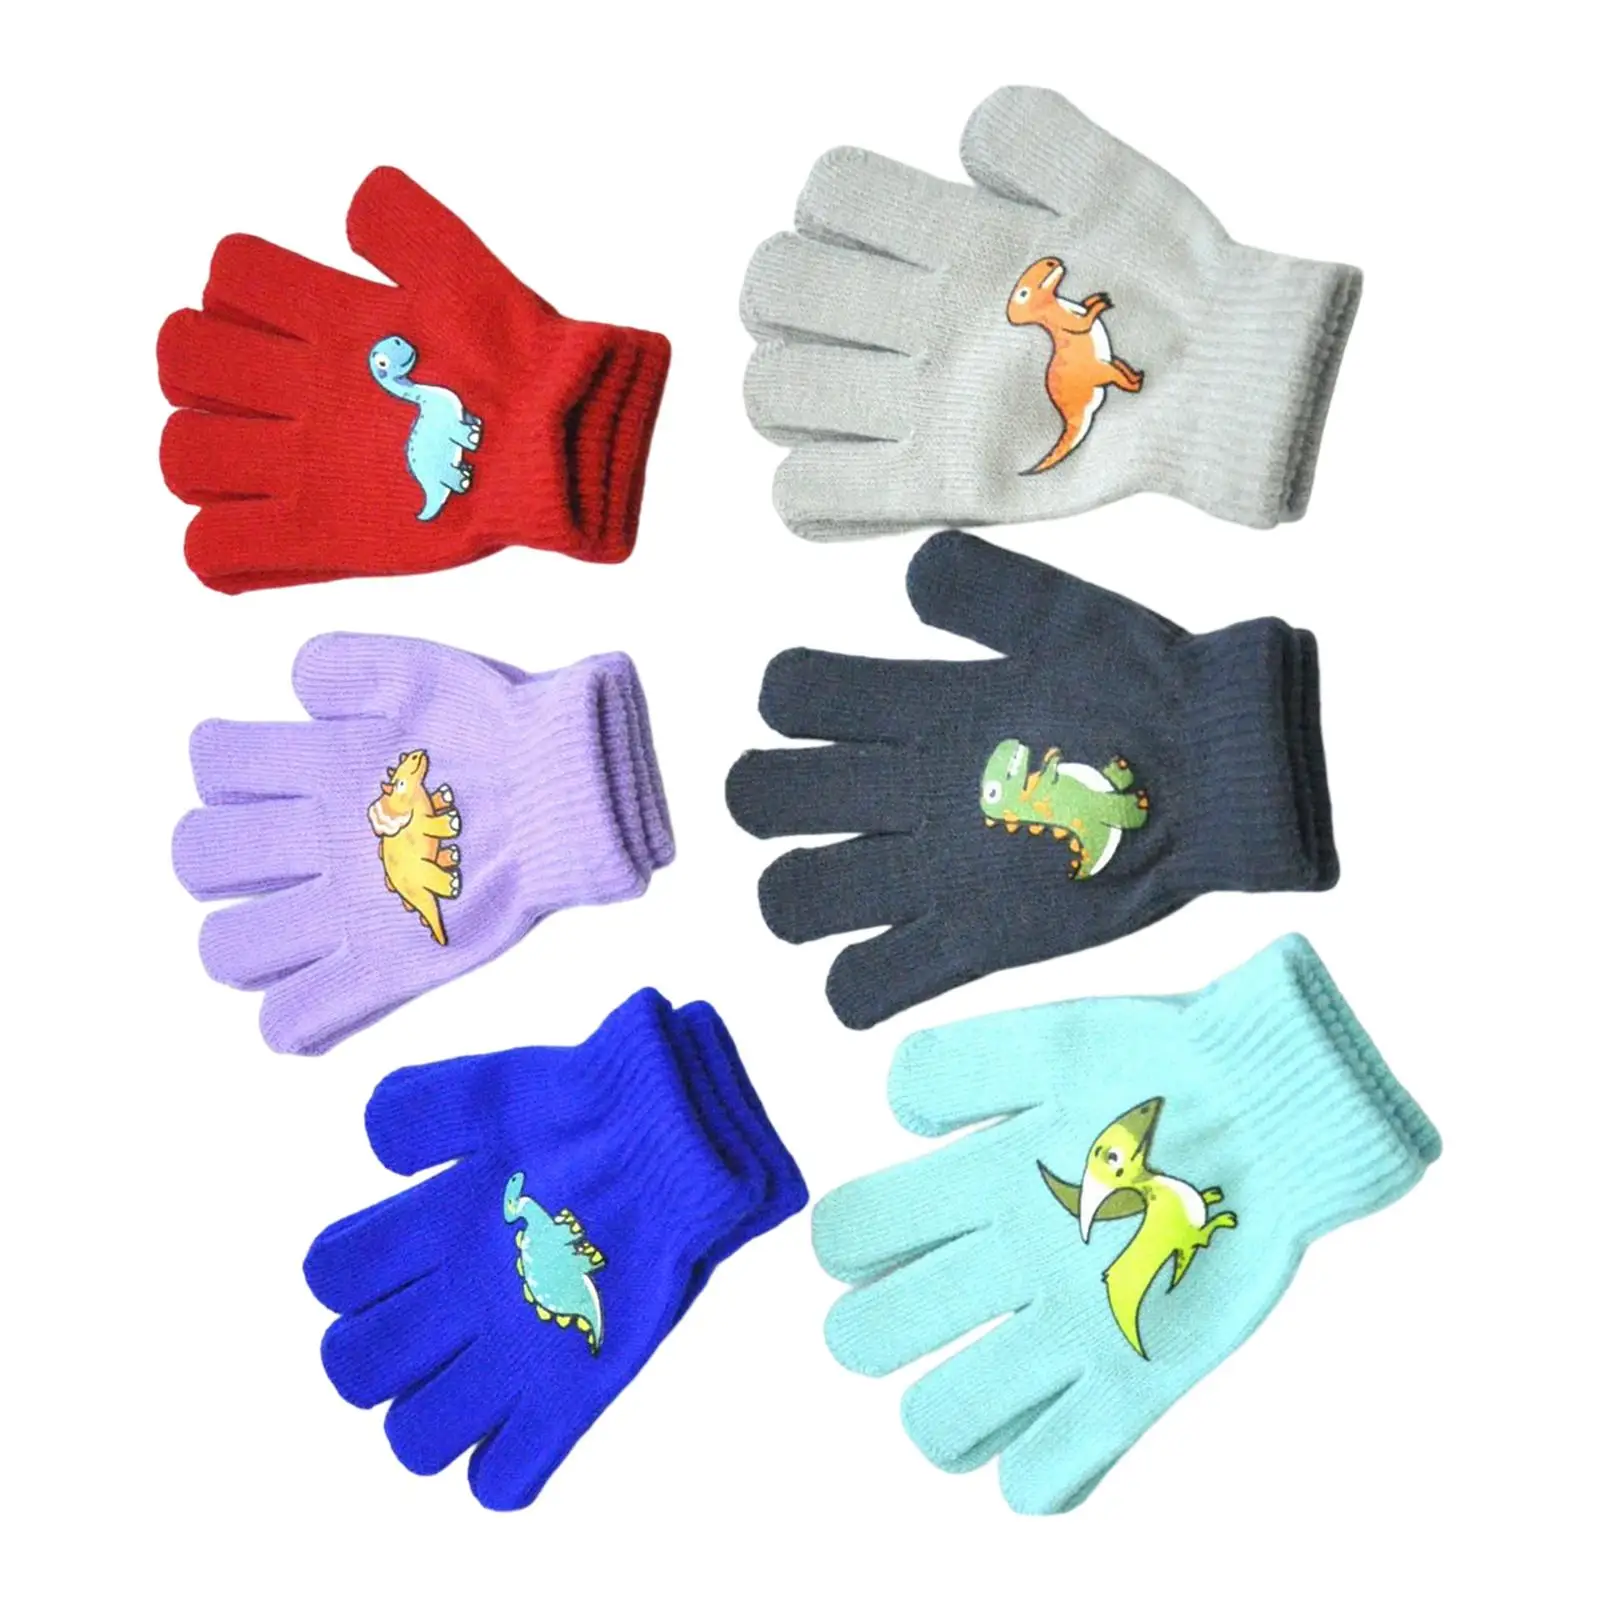 Kids Winter Gloves Stretch Full Finger Mittens Warm Winter Knit Gloves Washable Child Girls Boys Supplies Toddlers Cycling